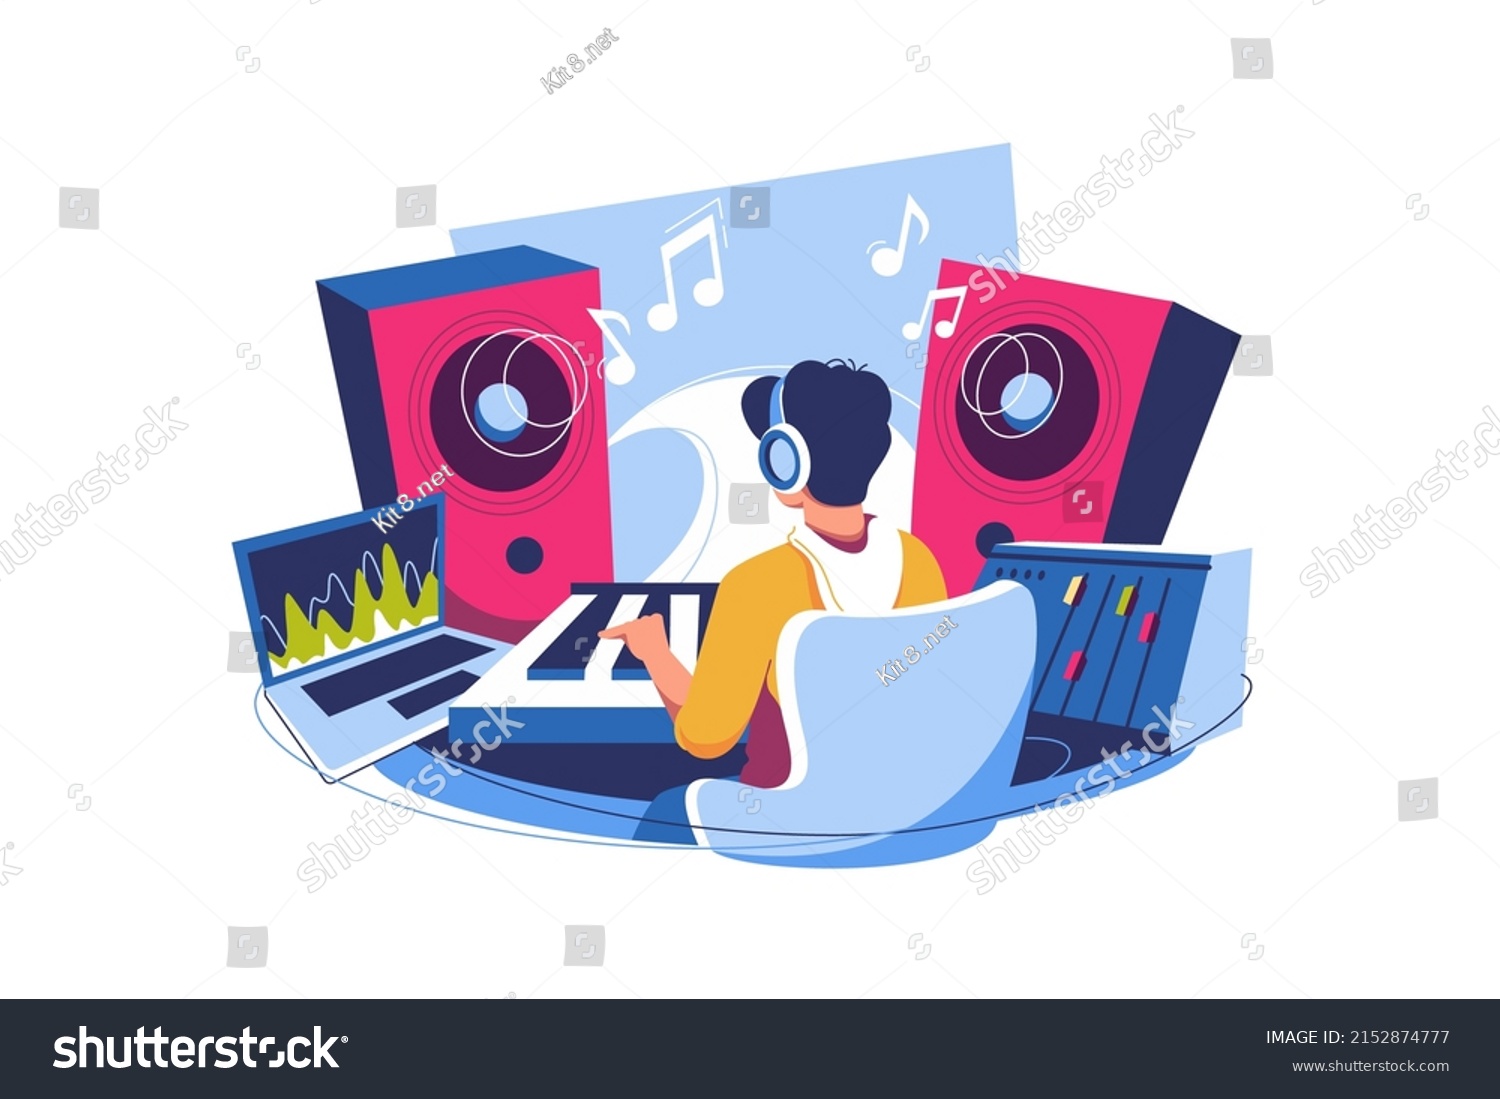 SVG of Music composer creating and recording music at workplace with computer, professional equipment, software vector illustration. Musician idea svg